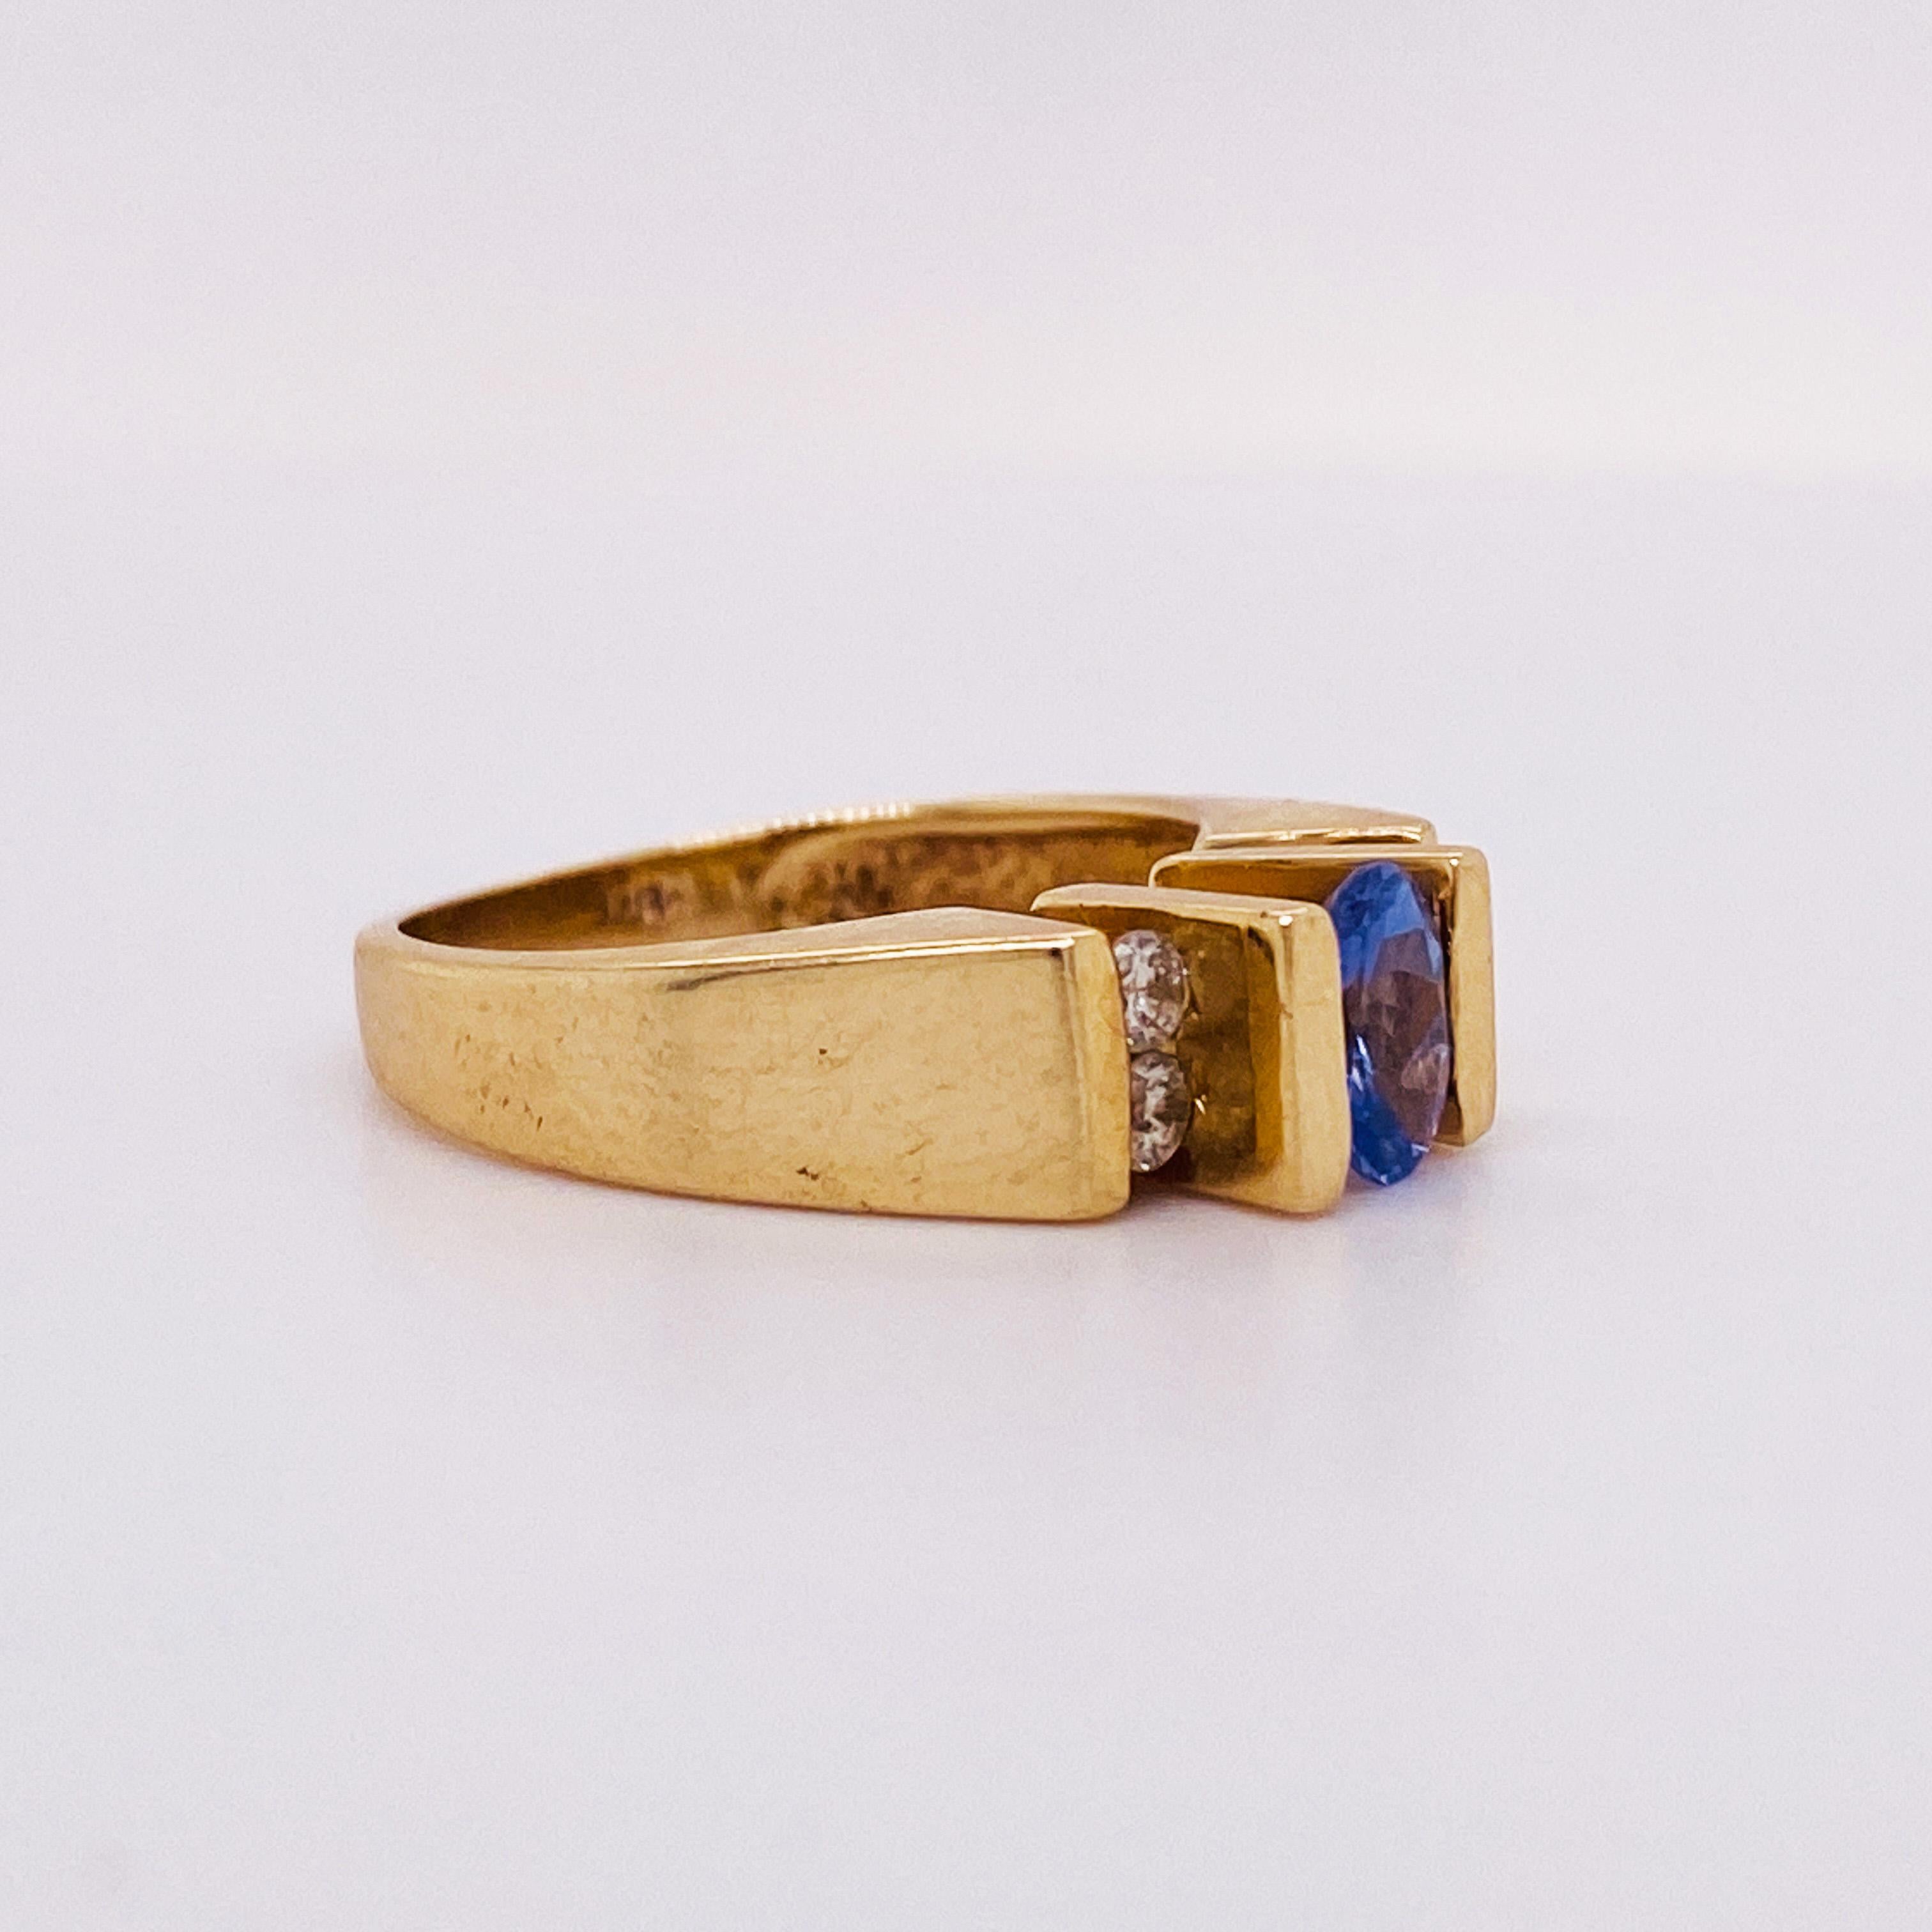 This stunningly beautiful tanzanite ring would make anyone thrilled to receive it! The bright, vibrant purple/blue tanzanite gemstones set in polished 14k yellow gold provide a look that is very modern and classic at the same time! This ring is very